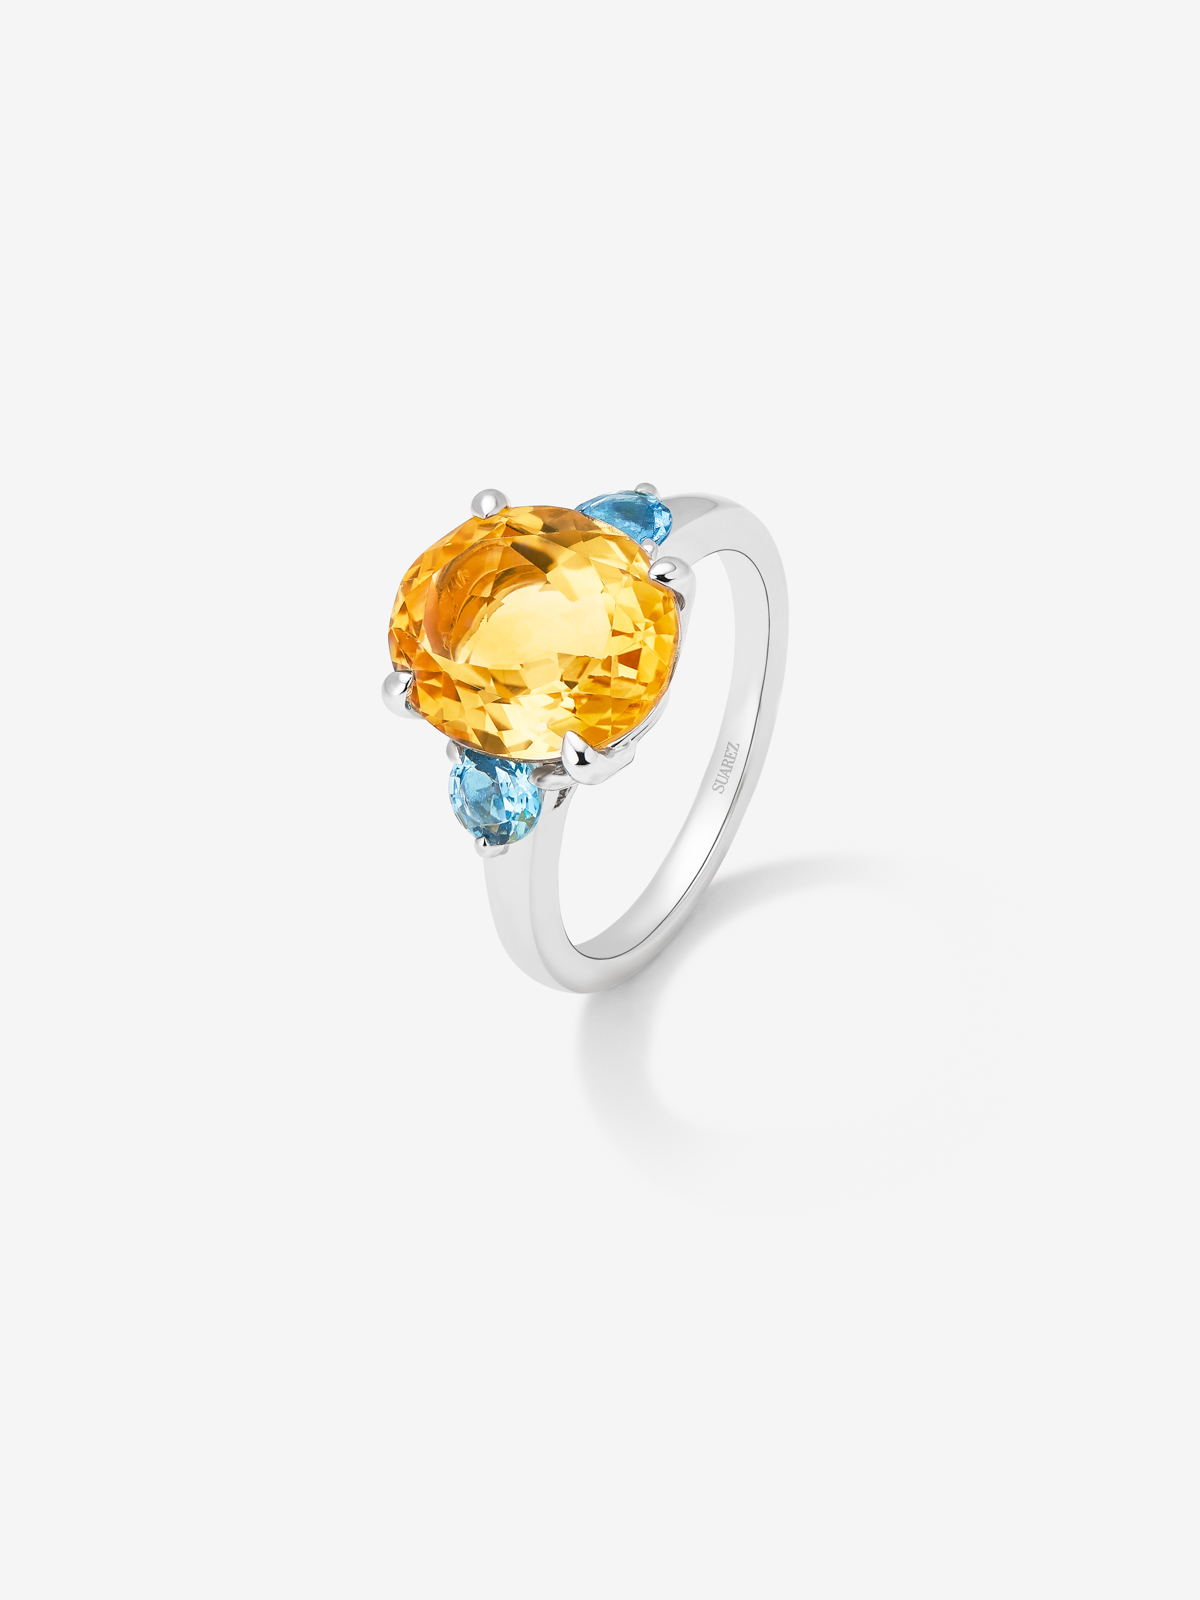 925 Silver Tiego Ring with Citrine Quartz in Oval Size 4.43 CTS and Swiss Blue Topacios in Bright Size of 0.54 CTS